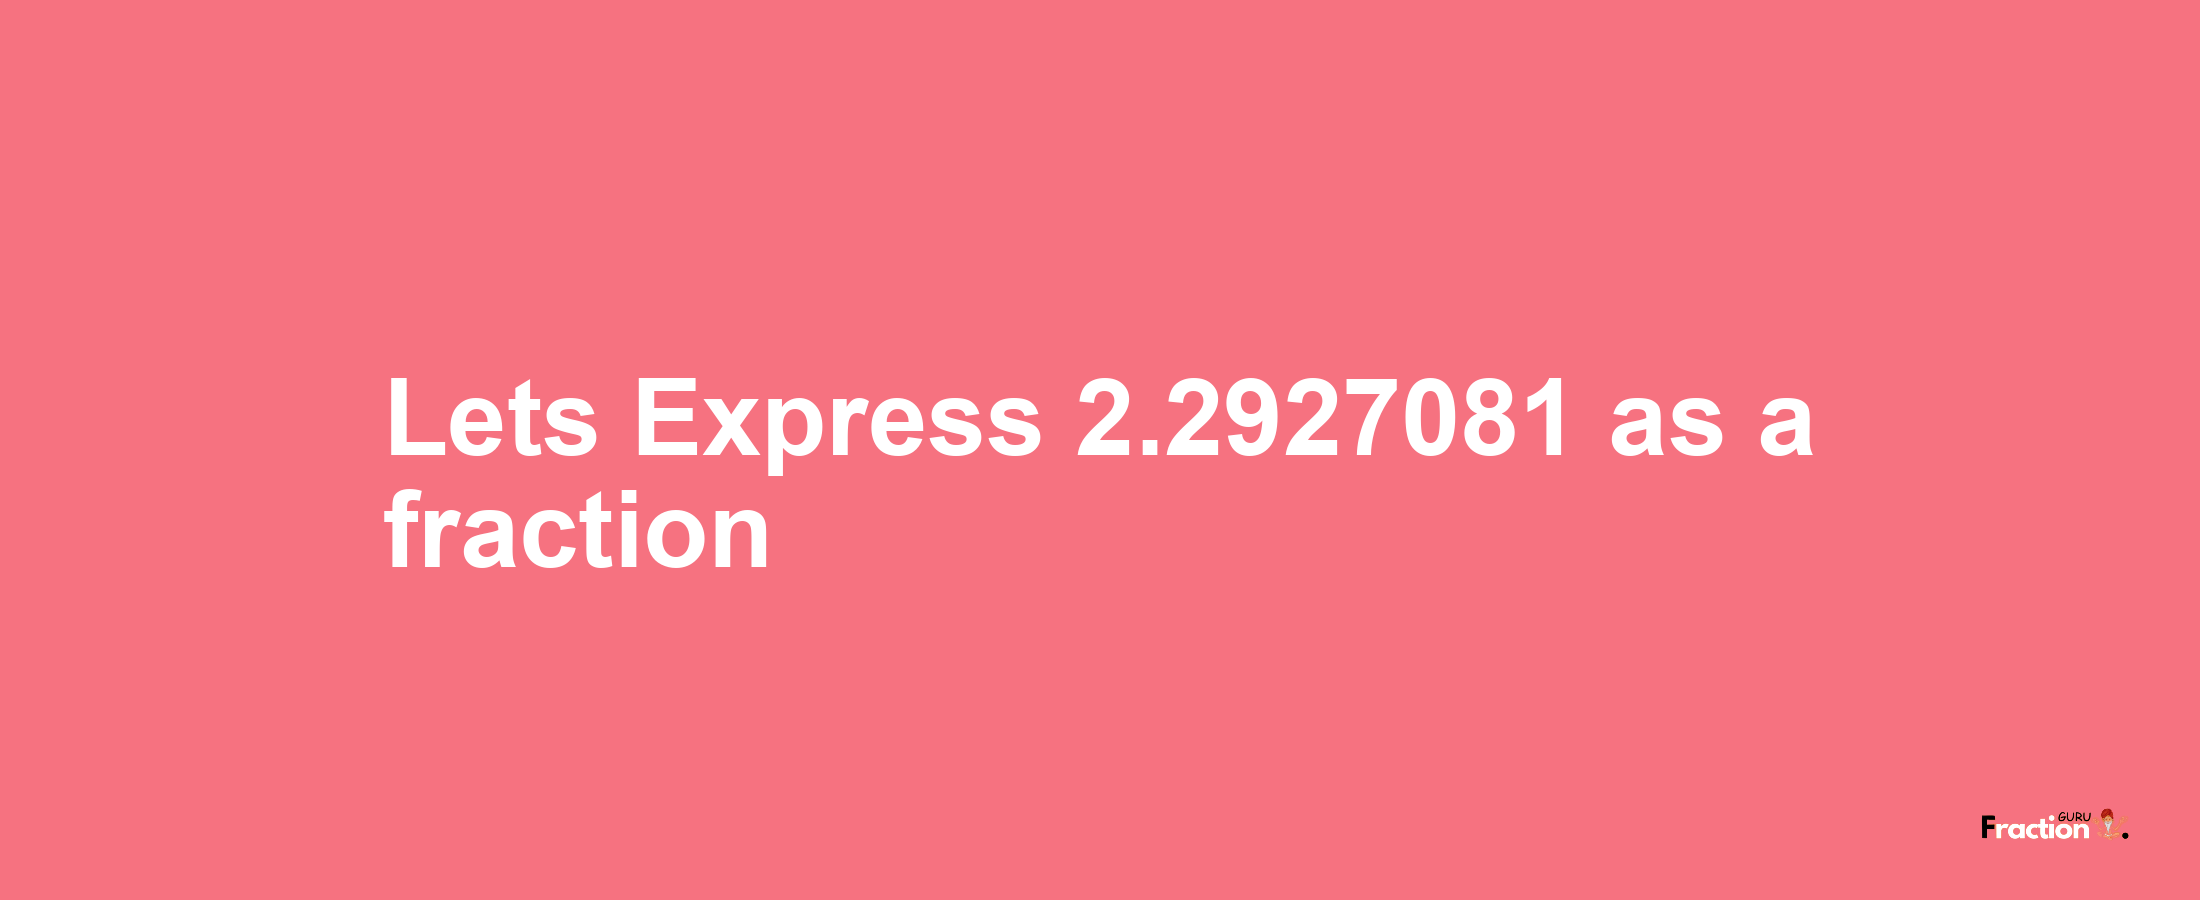 Lets Express 2.2927081 as afraction